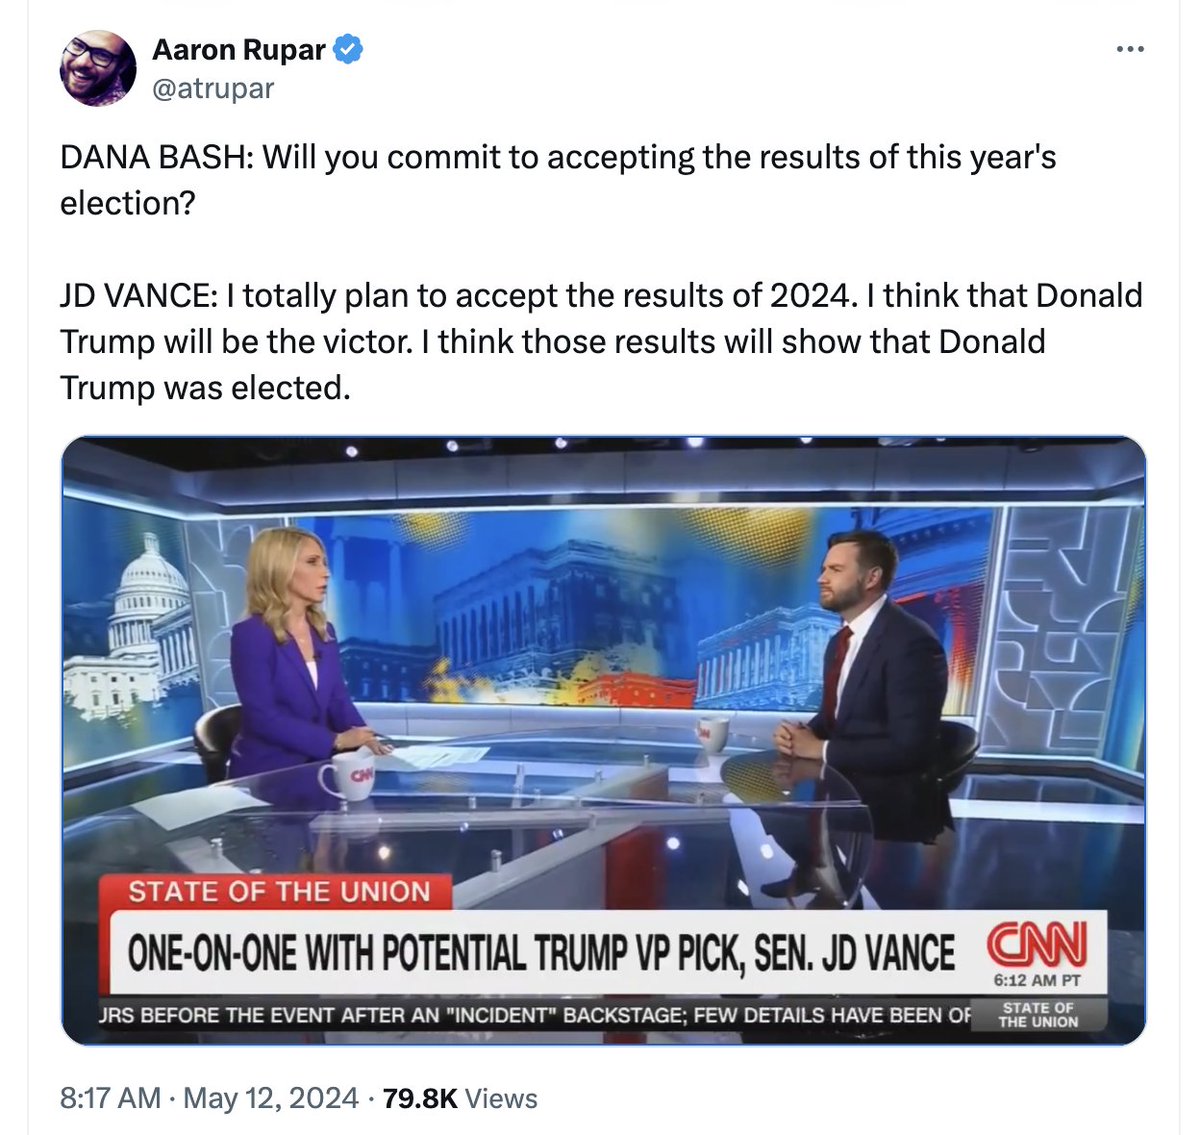 Sunday show hosts keep asking Republicans if they'll accept the election results, and their answers indicate they won't unless Trump wins. It's just not a sustainable situation for democracy.